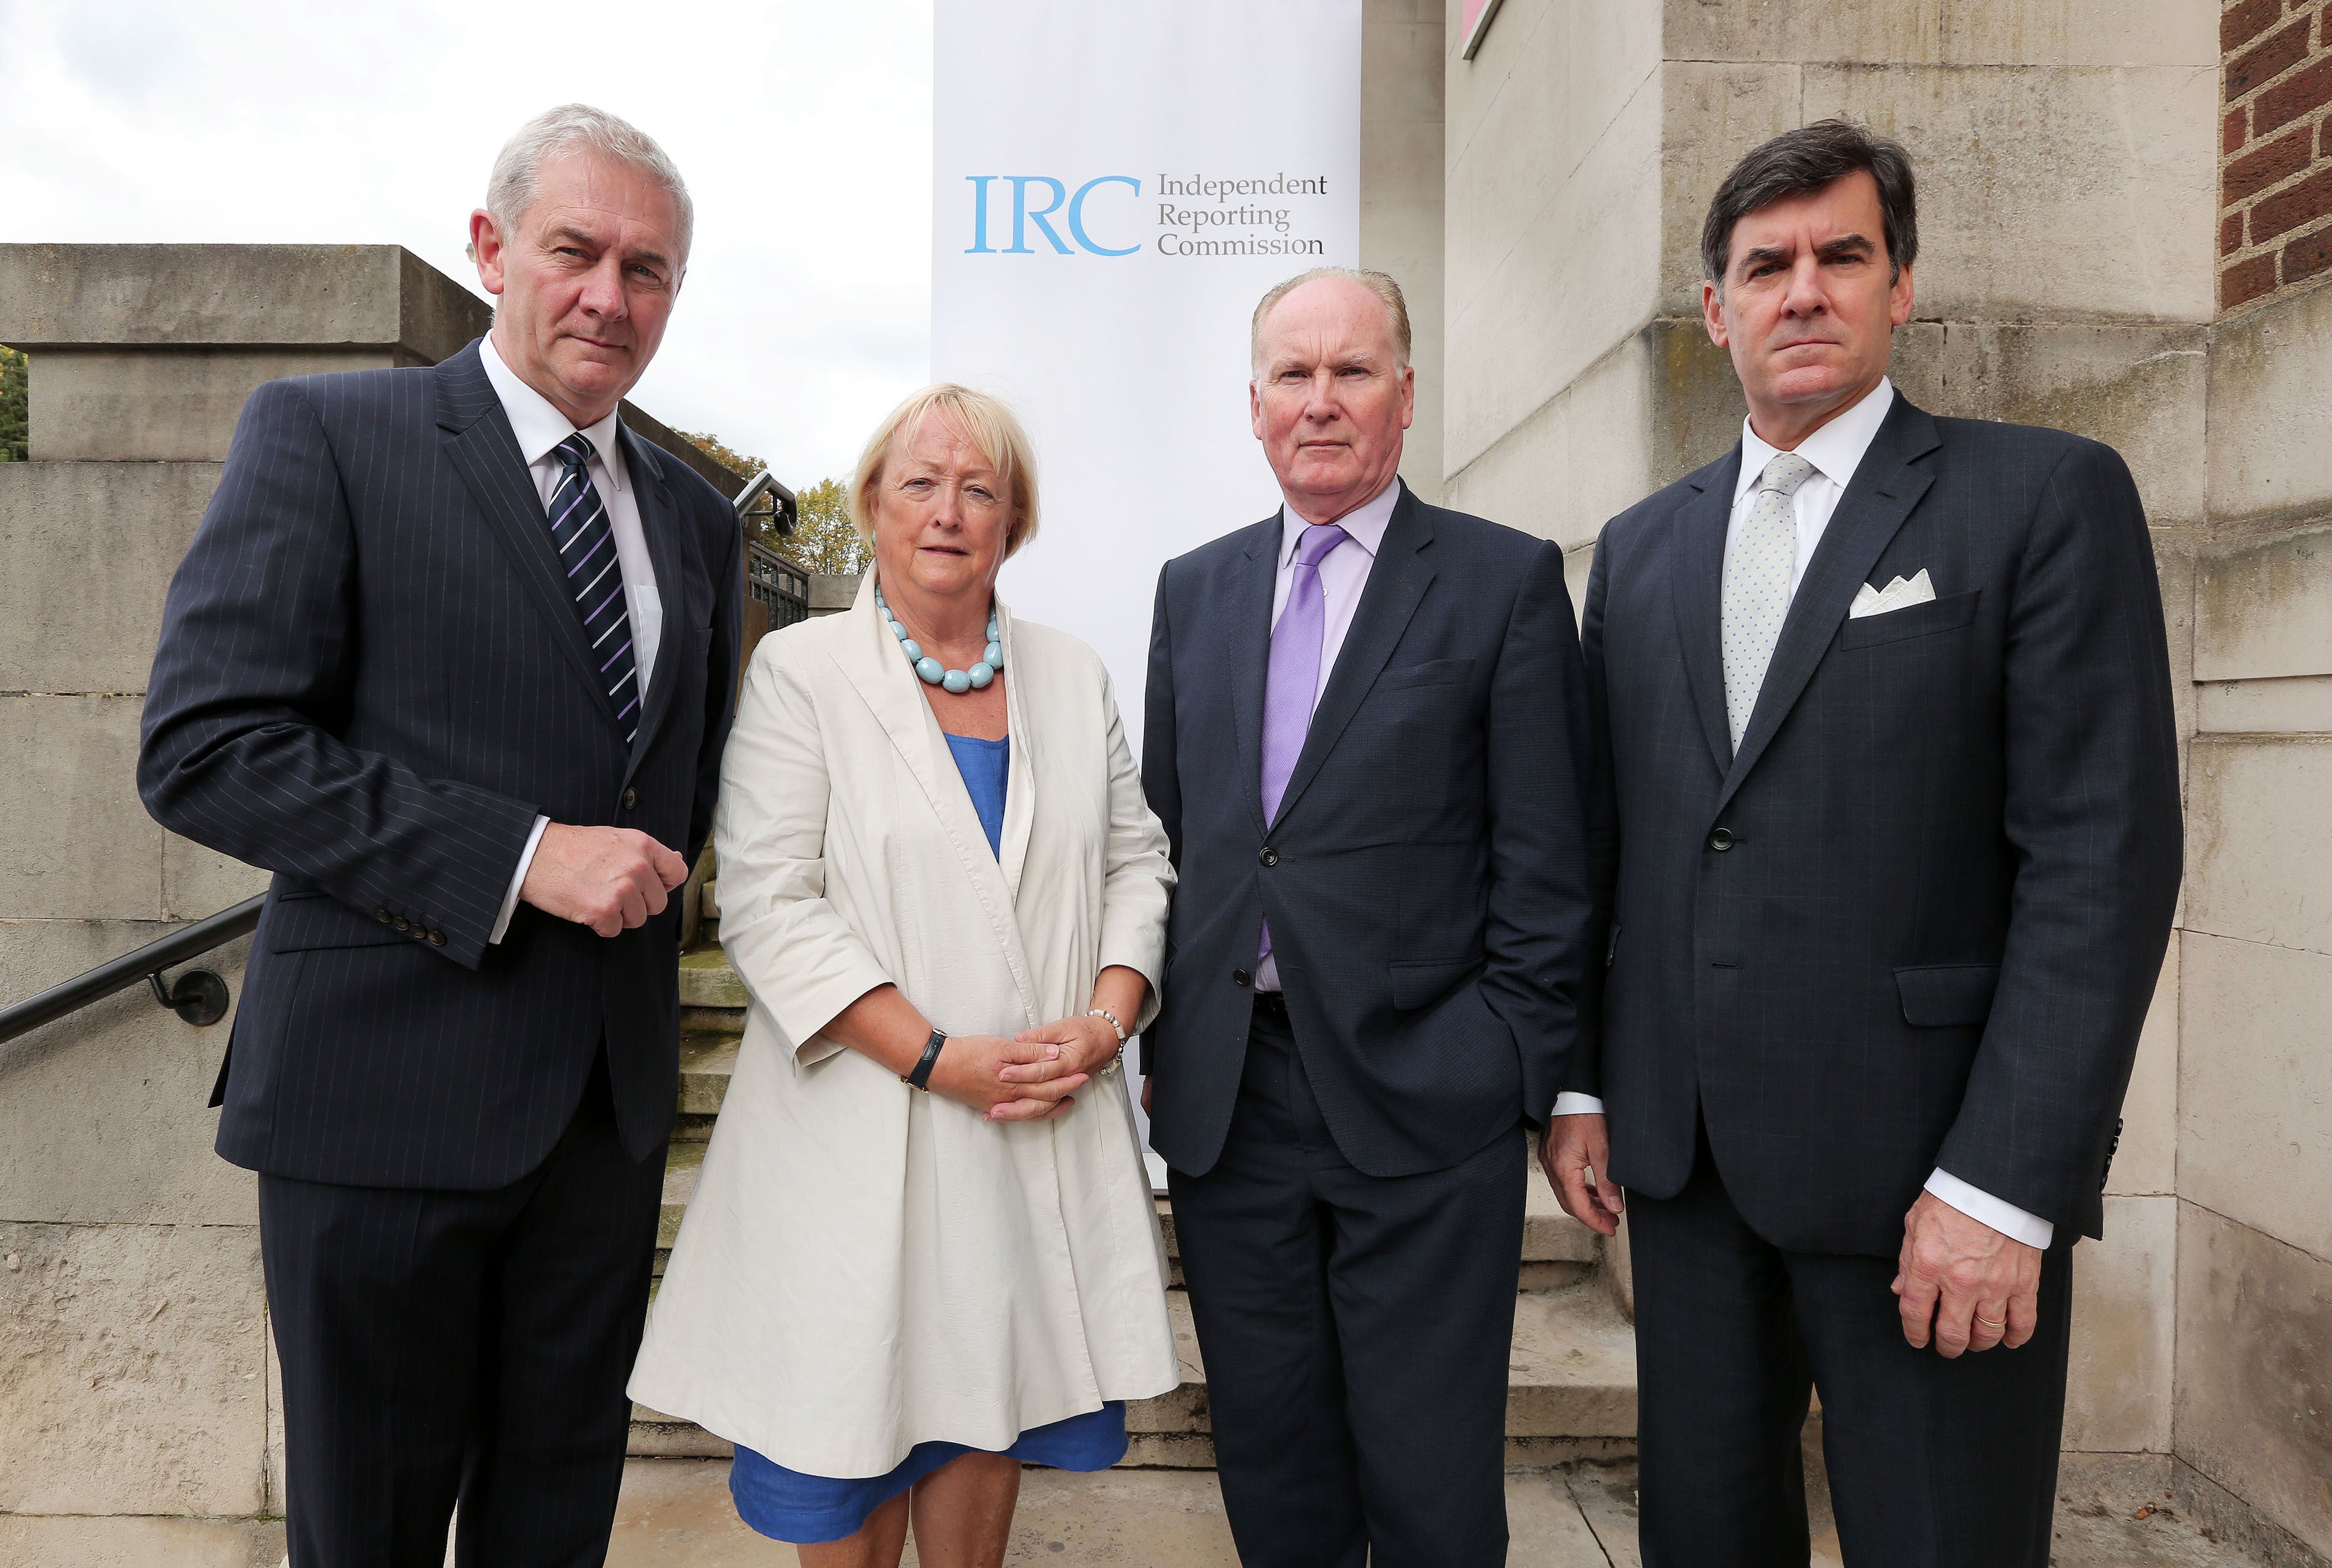 John McBurney, Monica McWilliams, Tim O’Connor and Mitchell Reiss attend the launch of the Independent Reporting Commission in Belfast (Press Eye/PA)